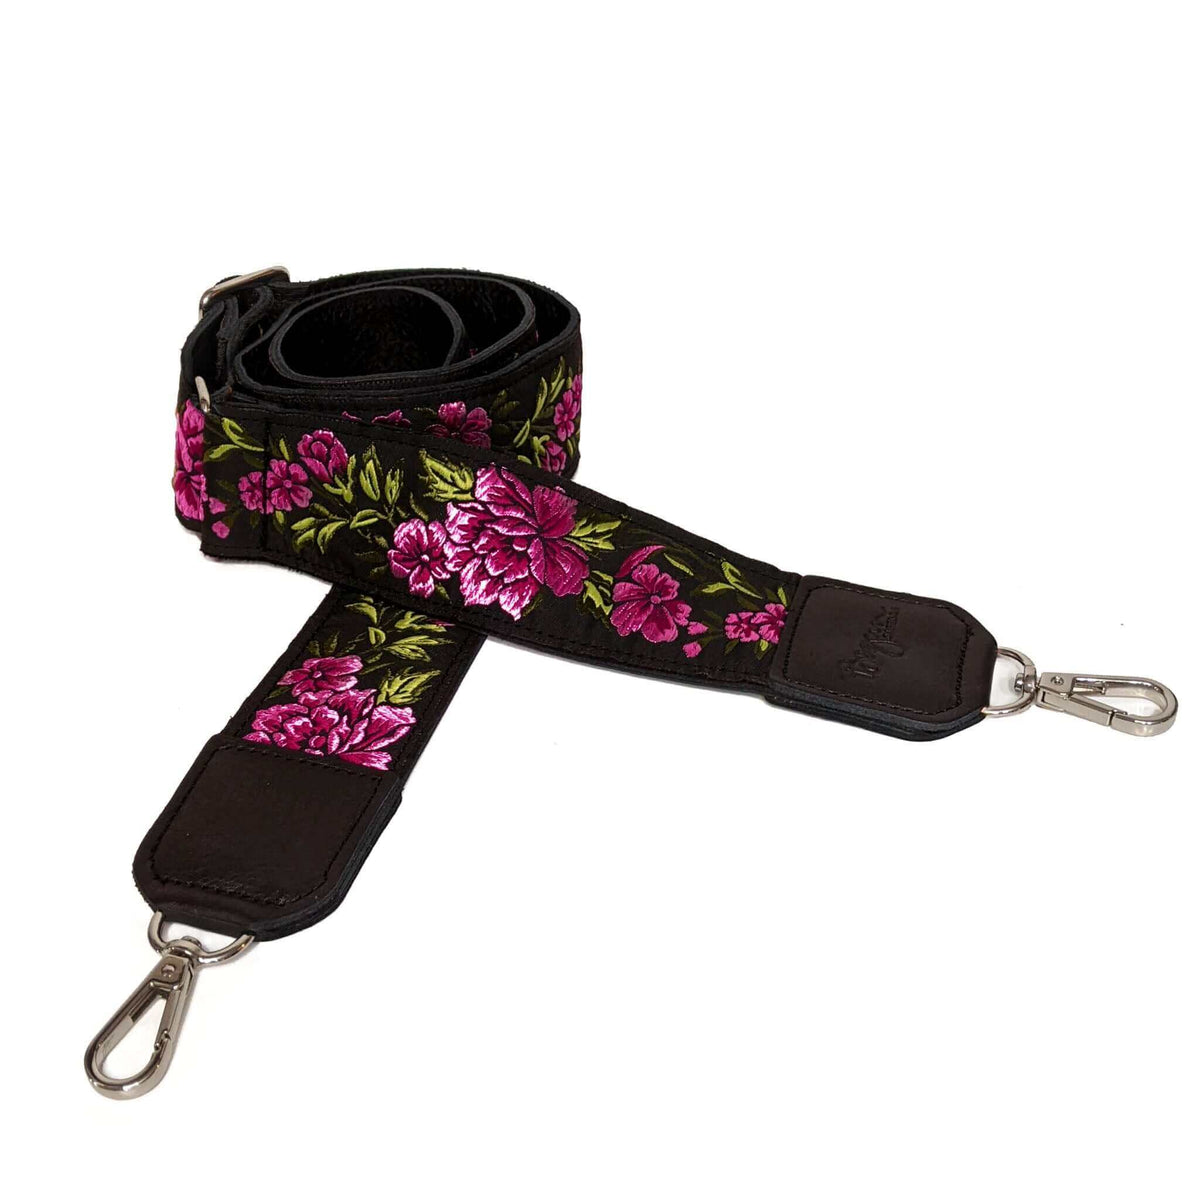 Guitar Purse Strap, 70's inspired, Pink Floral, Brynn Capella, made in the USA